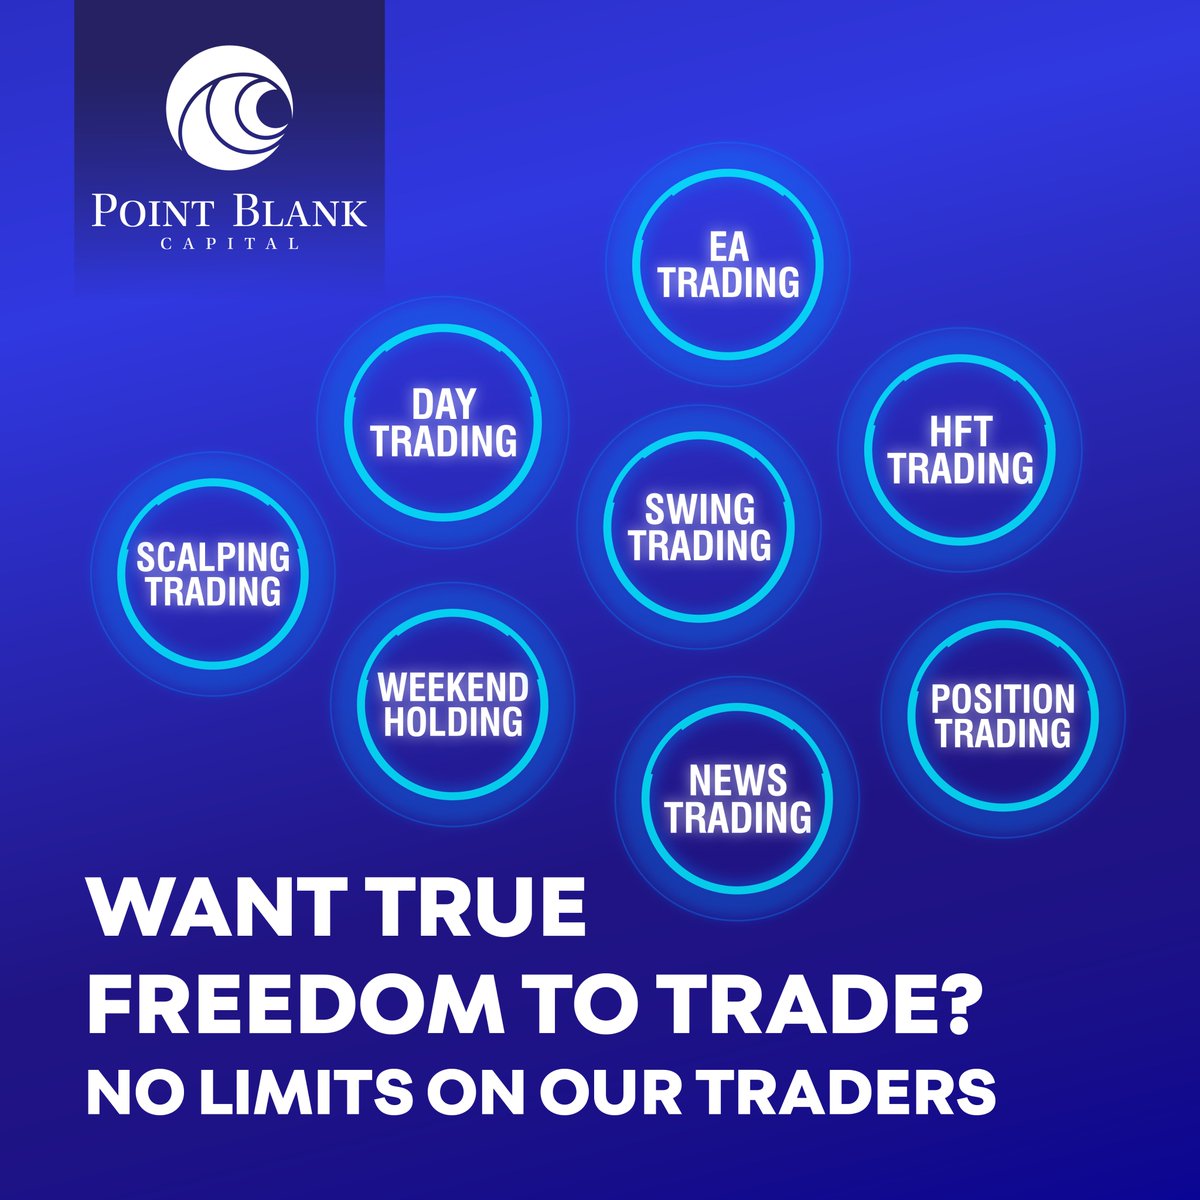 Point Blank Capital offers an industry-leading Evaluation Trading Program for Traders to maximise the profits they can generate with their talent, capable of managing risk and seeing consistent returns.

#markets #forex #forextrading #trading #trader #forextrader #forexchallenge